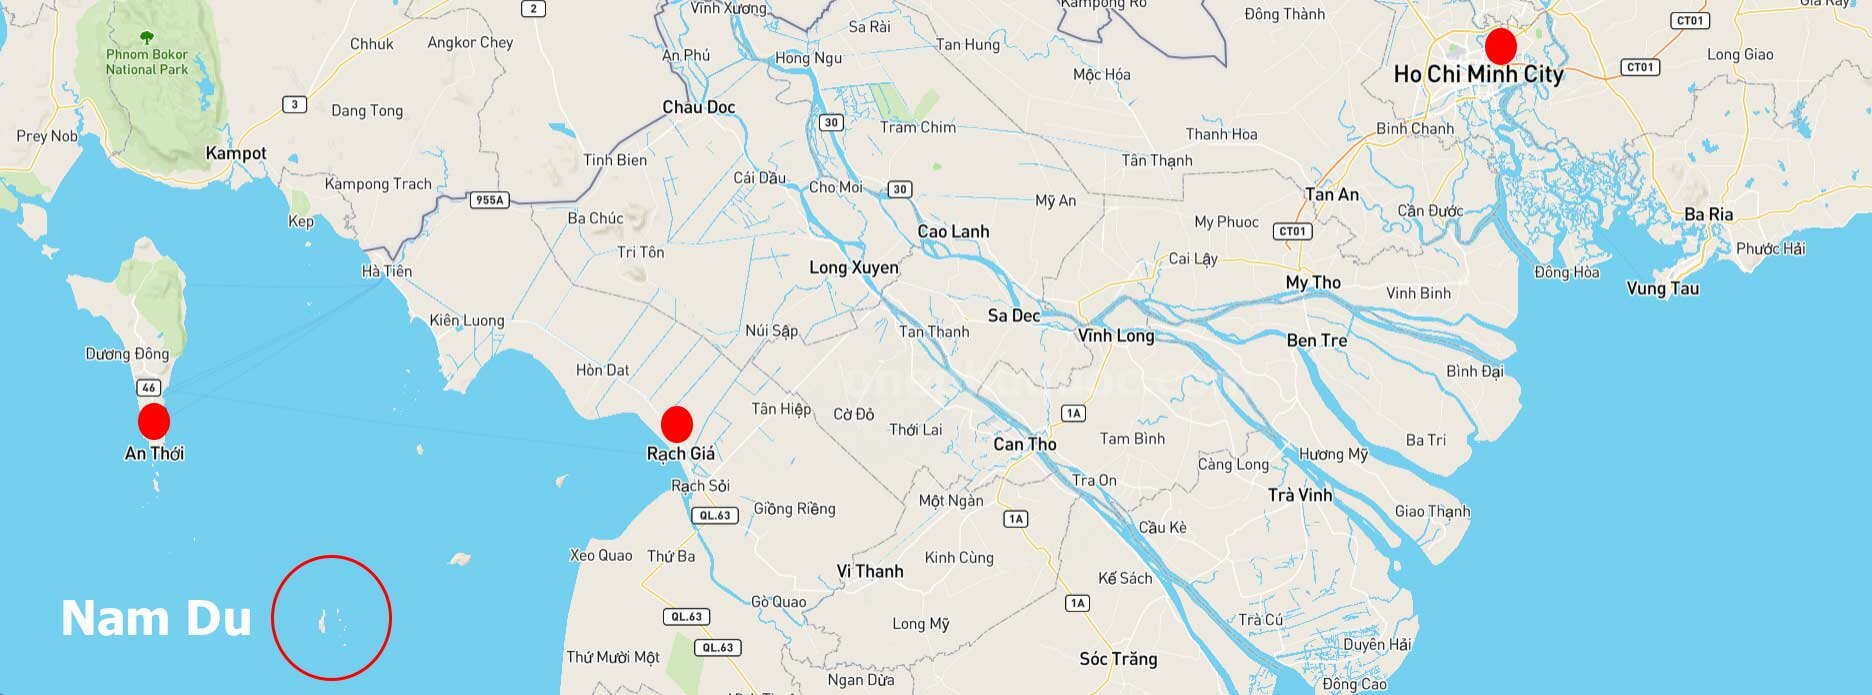 Where Nam Du is located